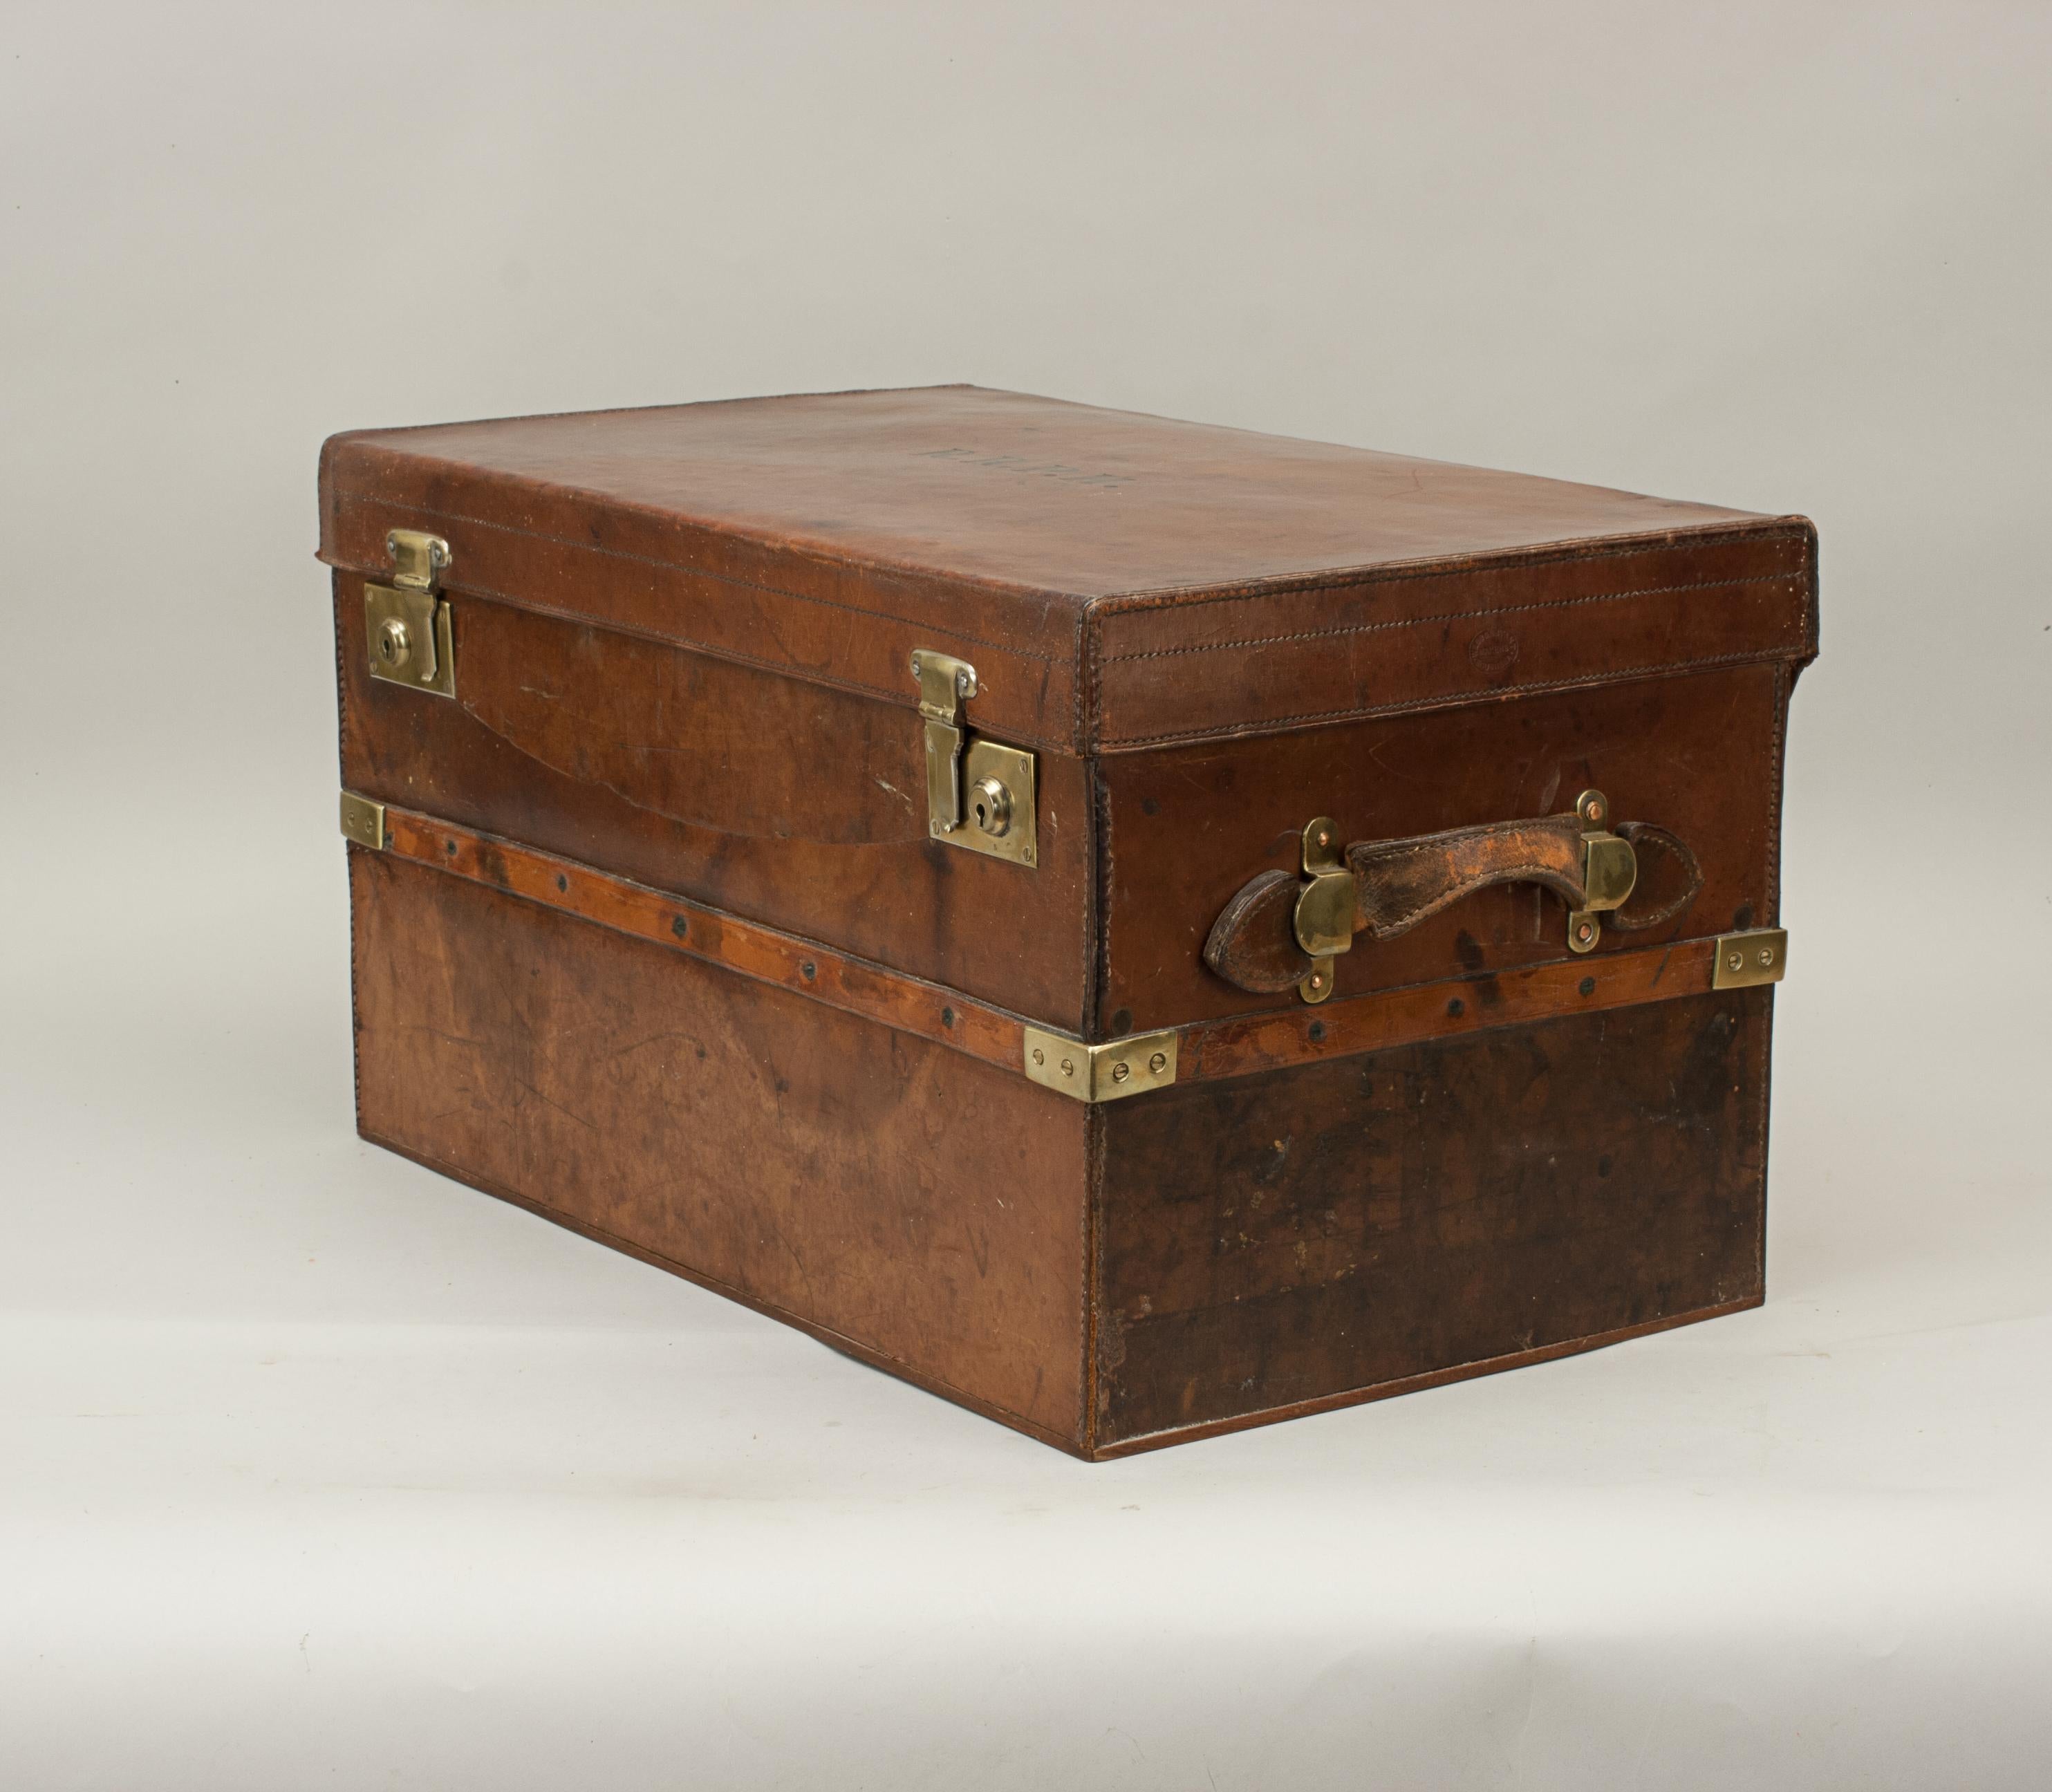 British Antique Brass Bound, Leather Travelling Trunk by Webb & Bryant